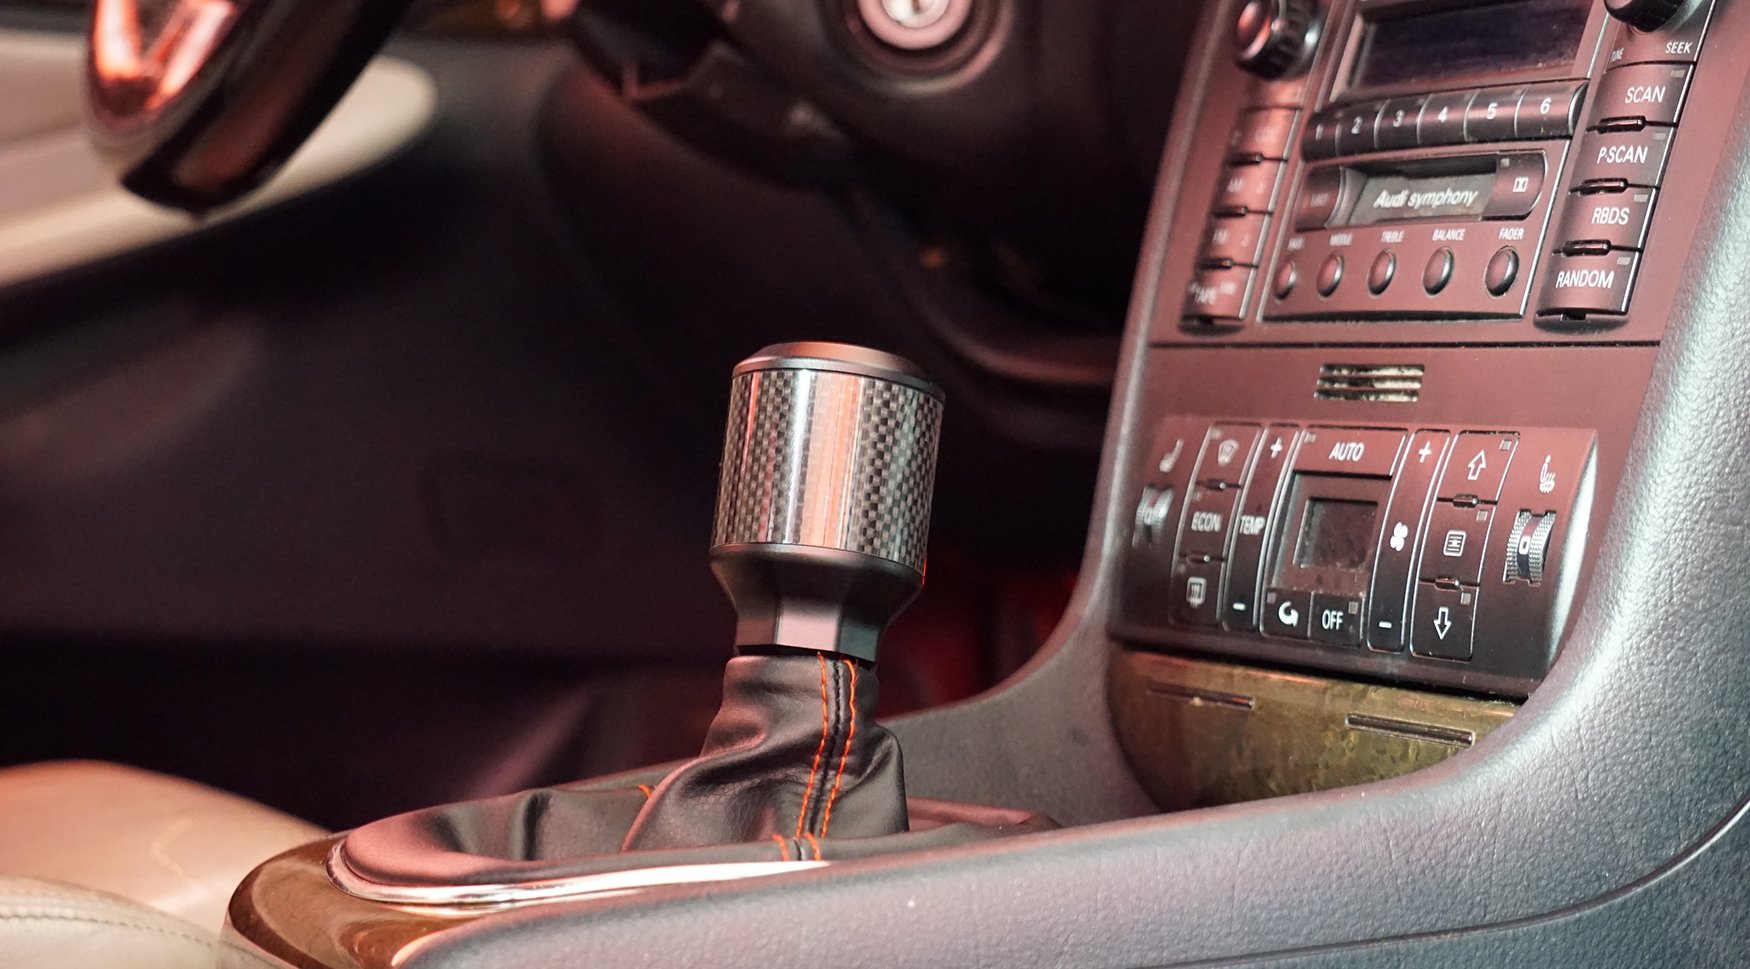 Why weighted shift knob?